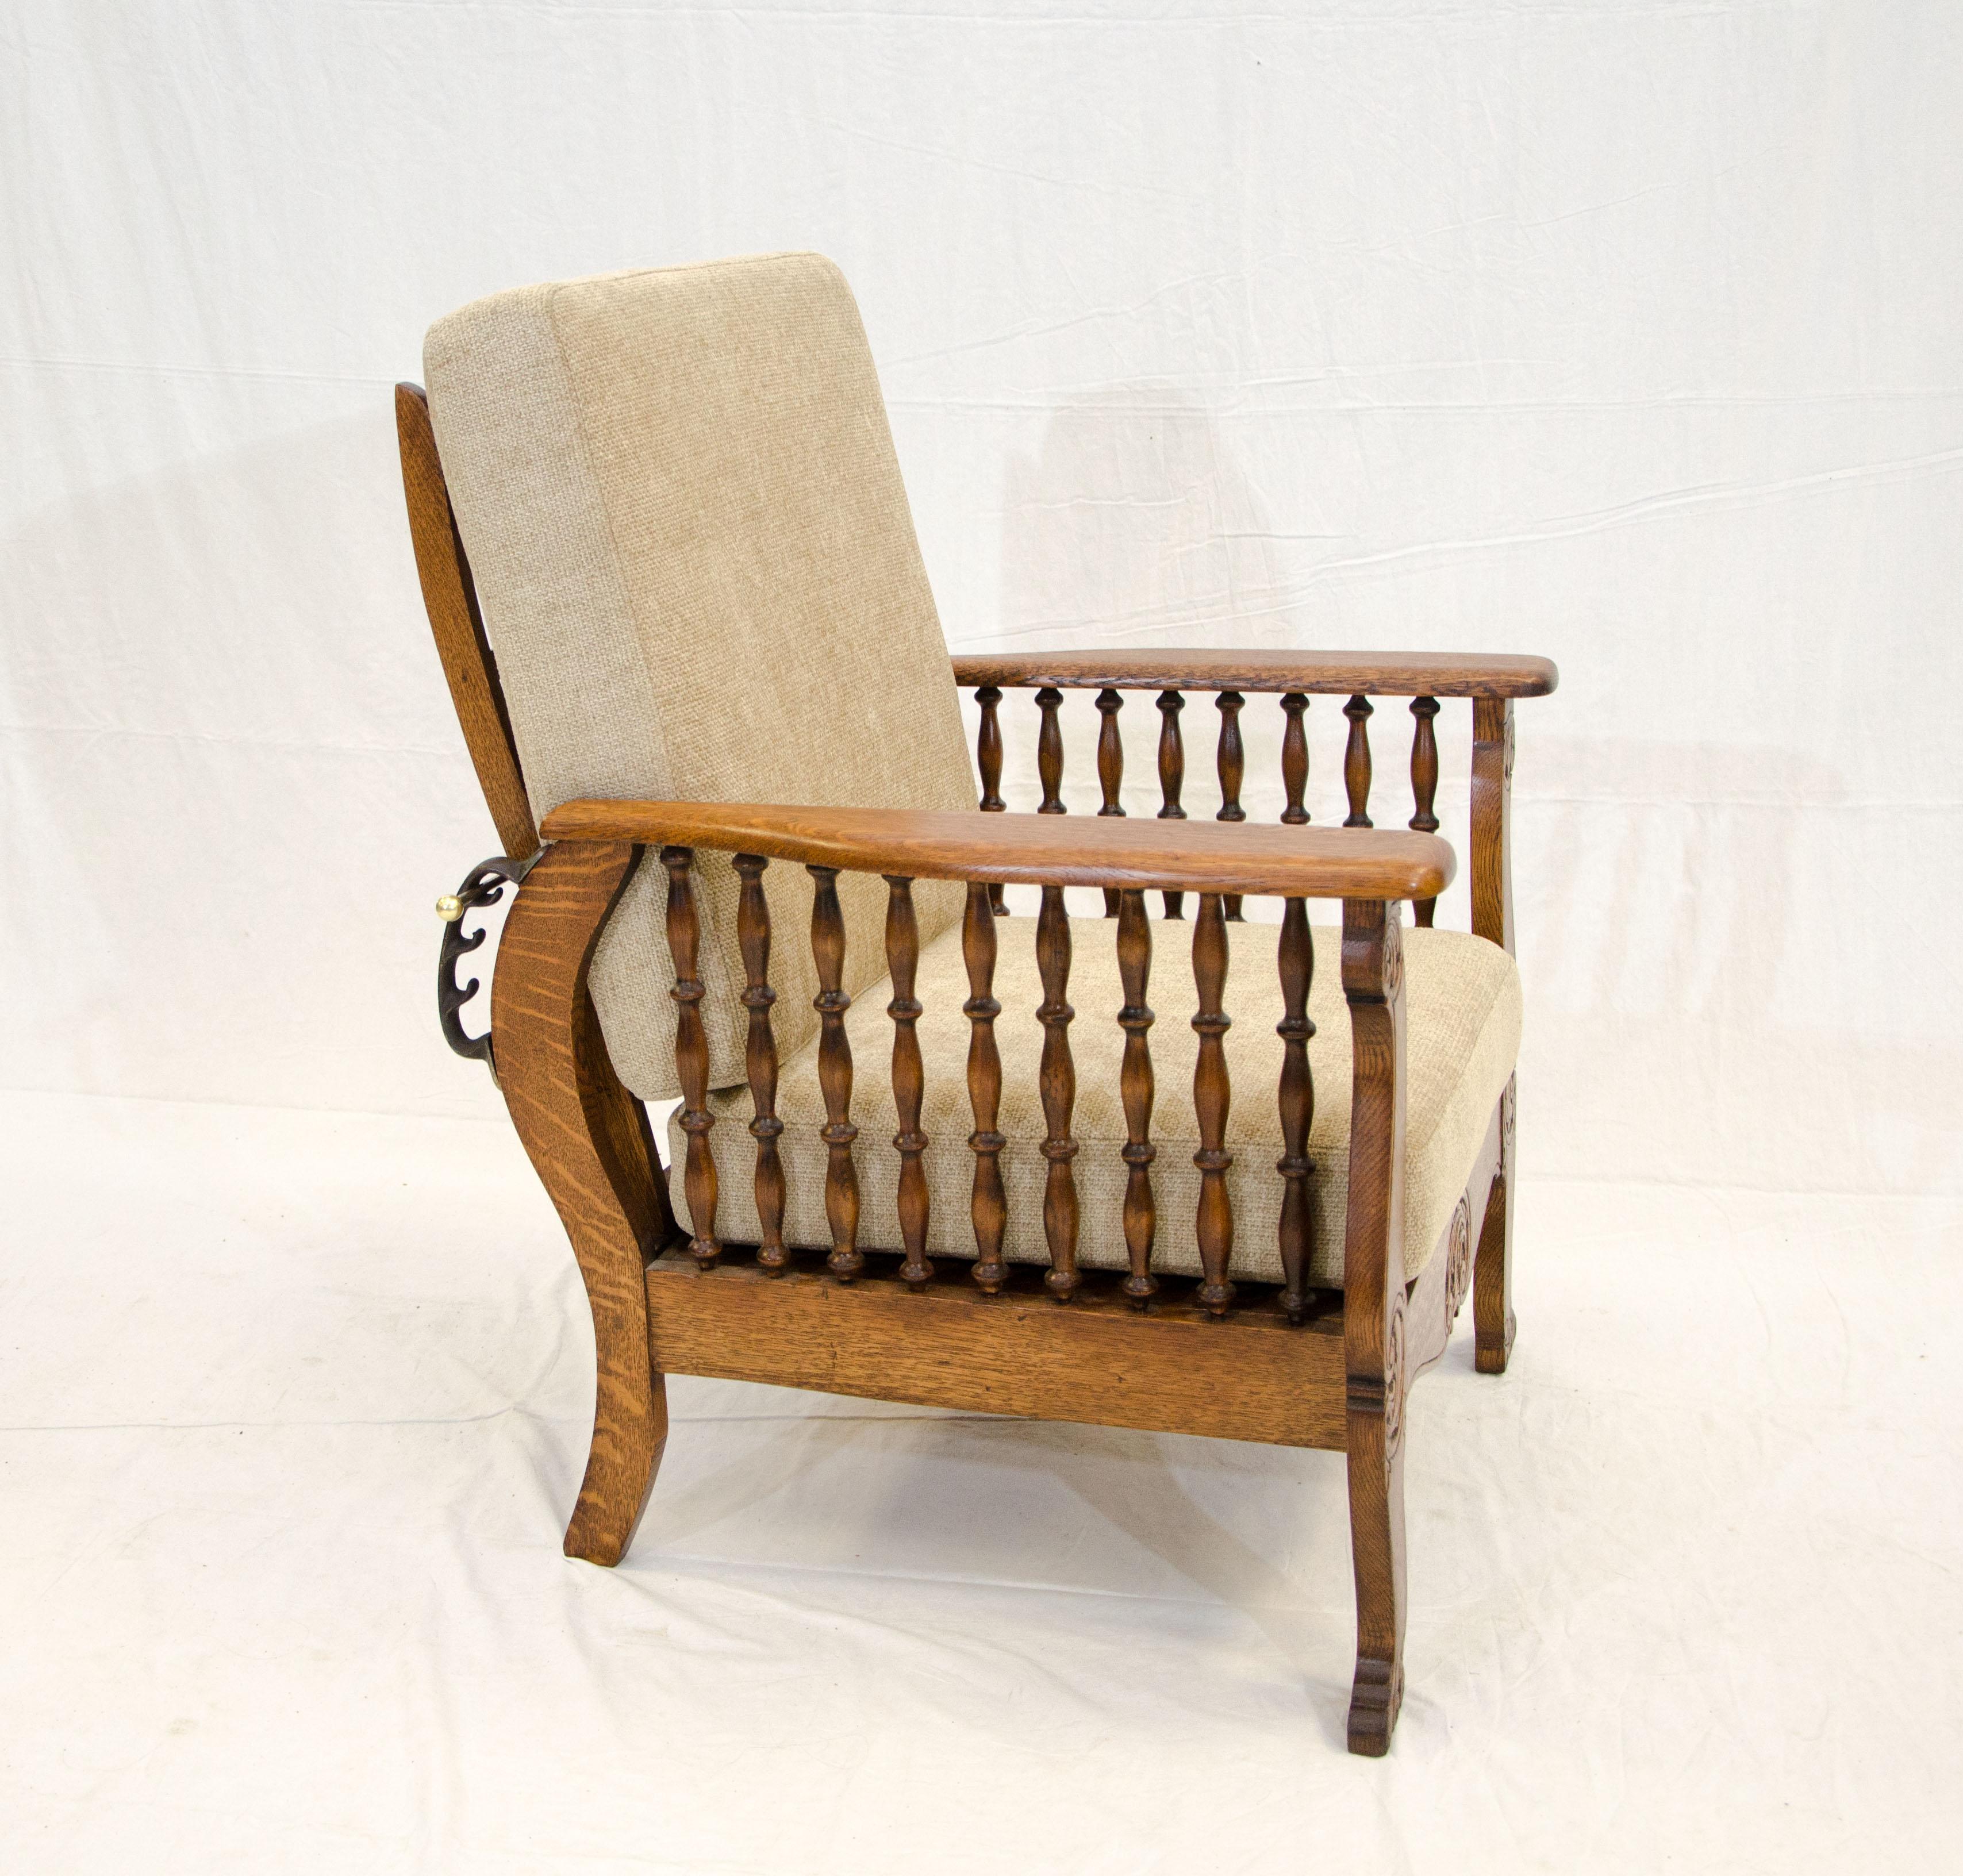 Nice antique quarter-sawn oak Morris chair with press carved front frame and turned spindles. The newly upholstered 4